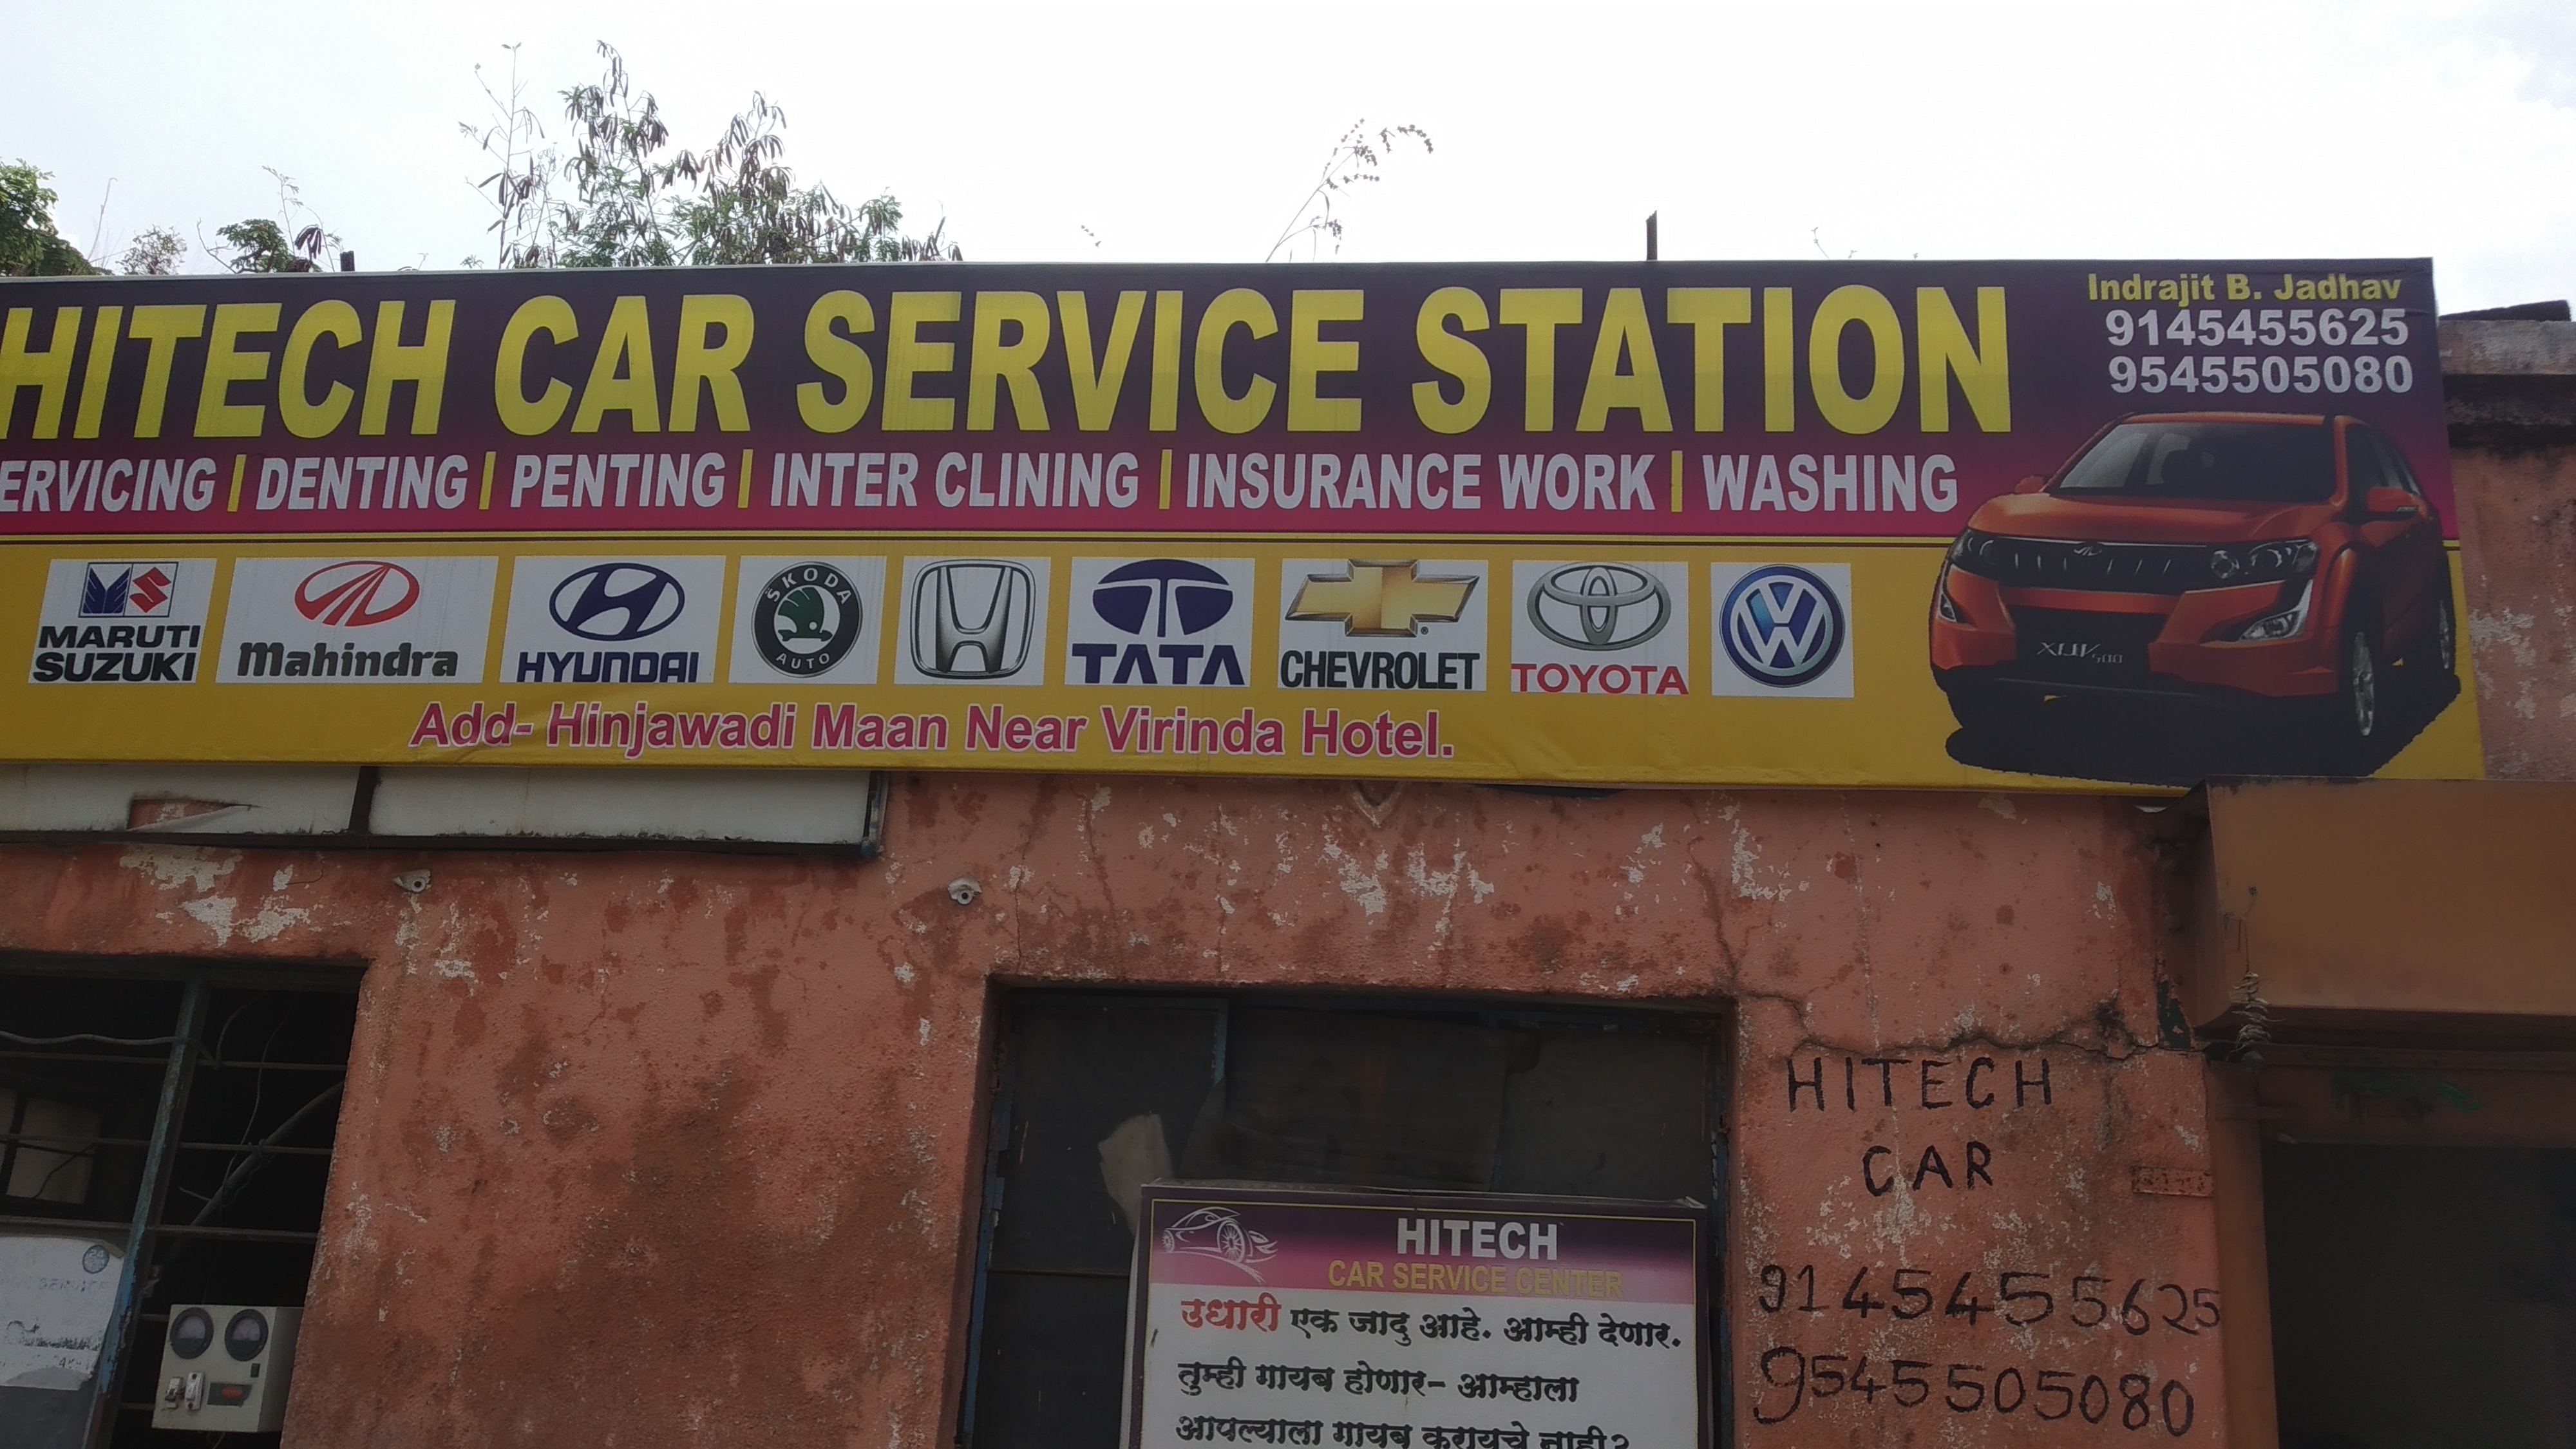 Hitech Car Service Station  in Chinchwad Pune at Affordable Price.